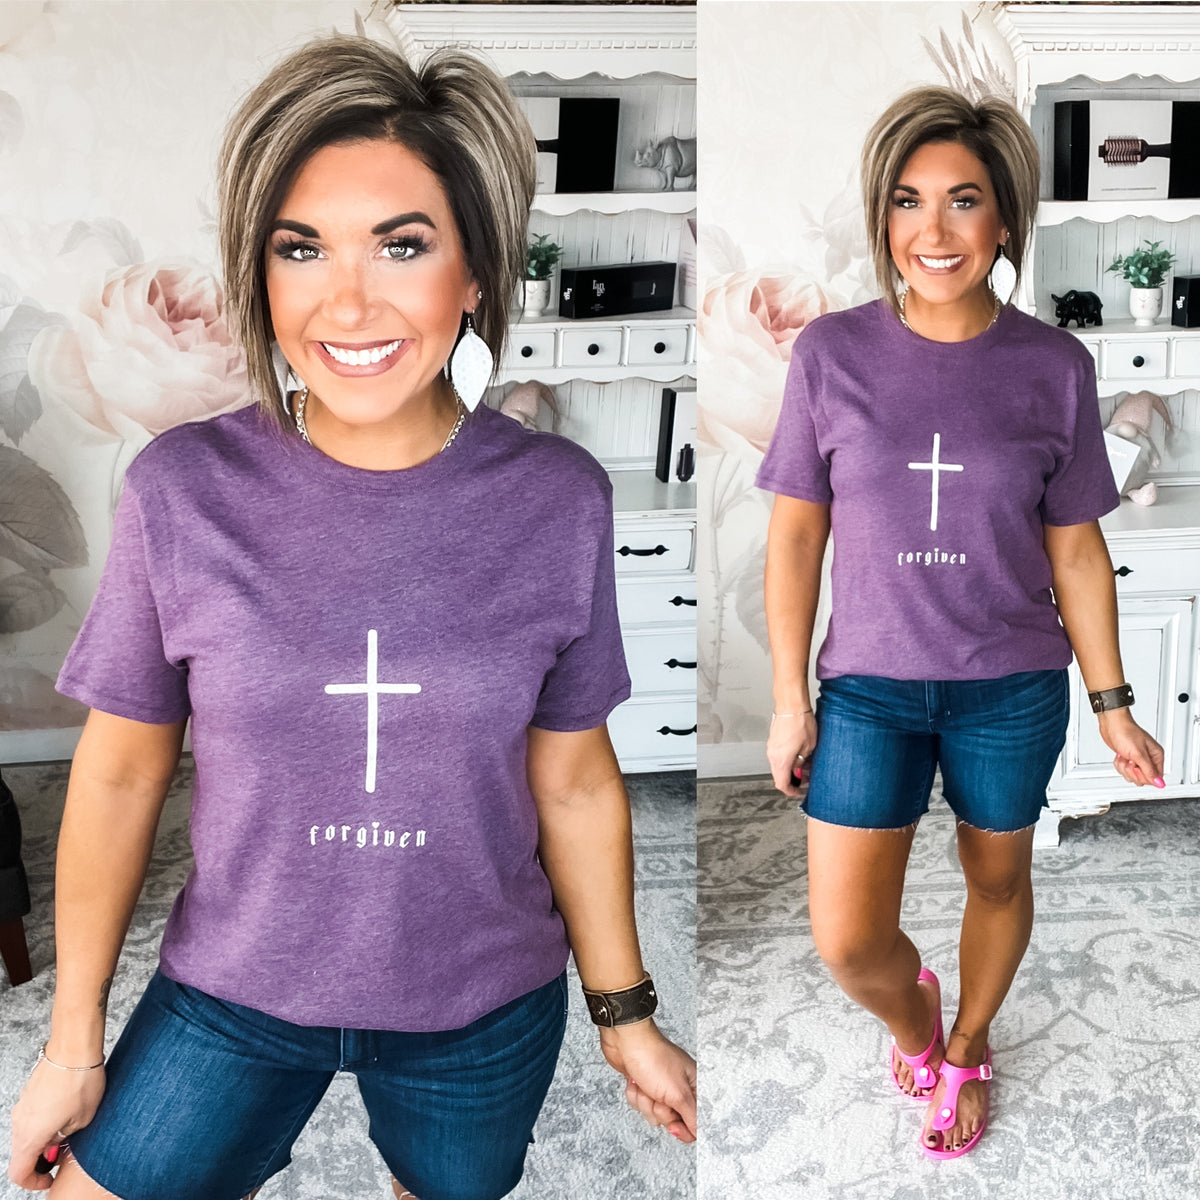 Forgiven Cross Graphic Tee